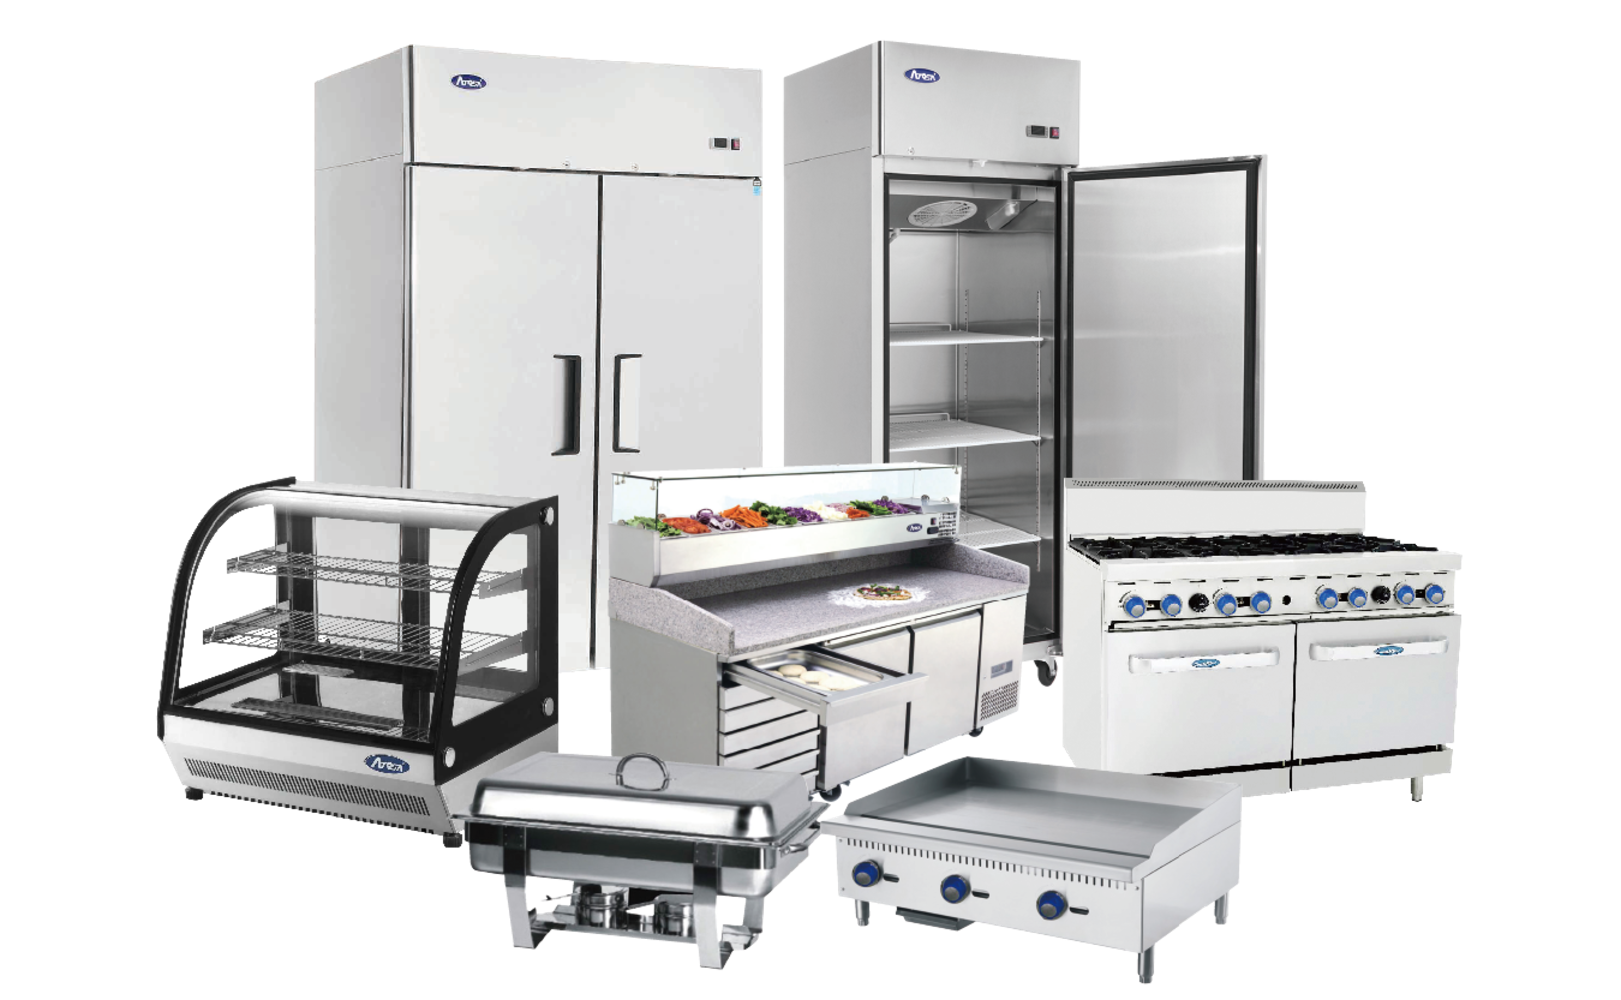 LIQUIDATION OF CATERING COMPANY ASSETS | TO INCLUDE PIZZA OVENS, FRYERS, COOKERS, FRIDGES, FREEZERS & MORE ENDS 10.30am on Friday 19th April